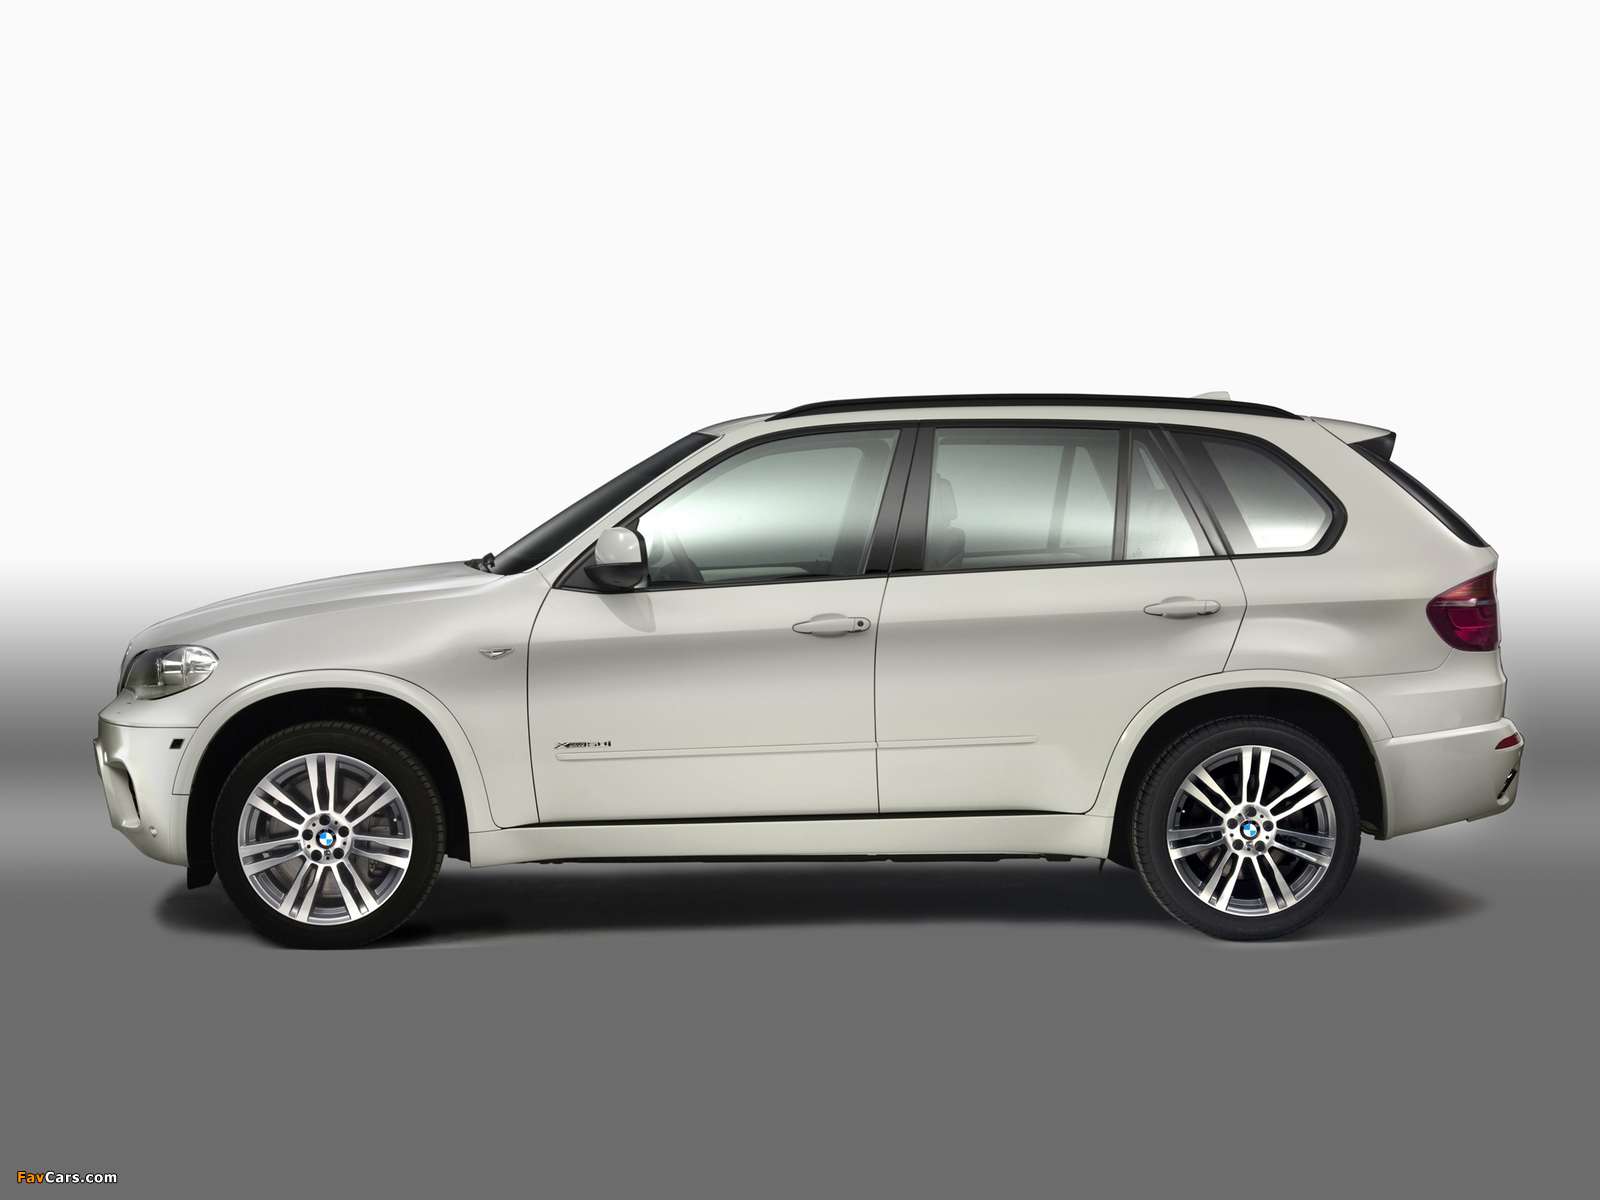 BMW X5 xDrive50i M Sports Package (E70) 2010 pictures (1600 x 1200)